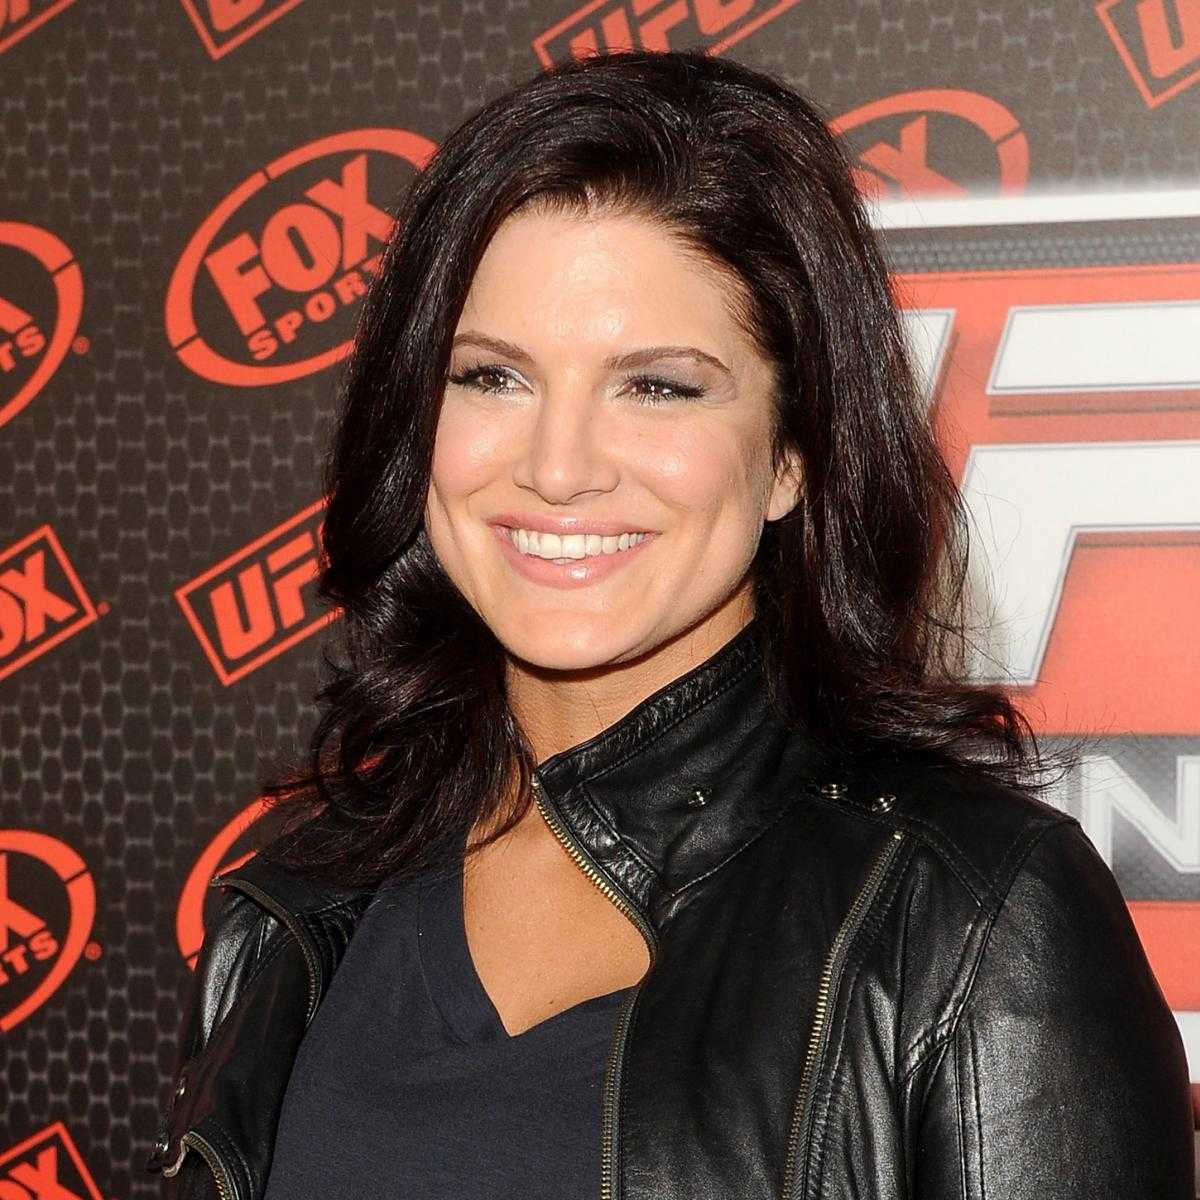 75+ Hottest Pictures Of Gina Carano Who Plays Angel Dust In Deadpool Movies | Best Of Comic Books